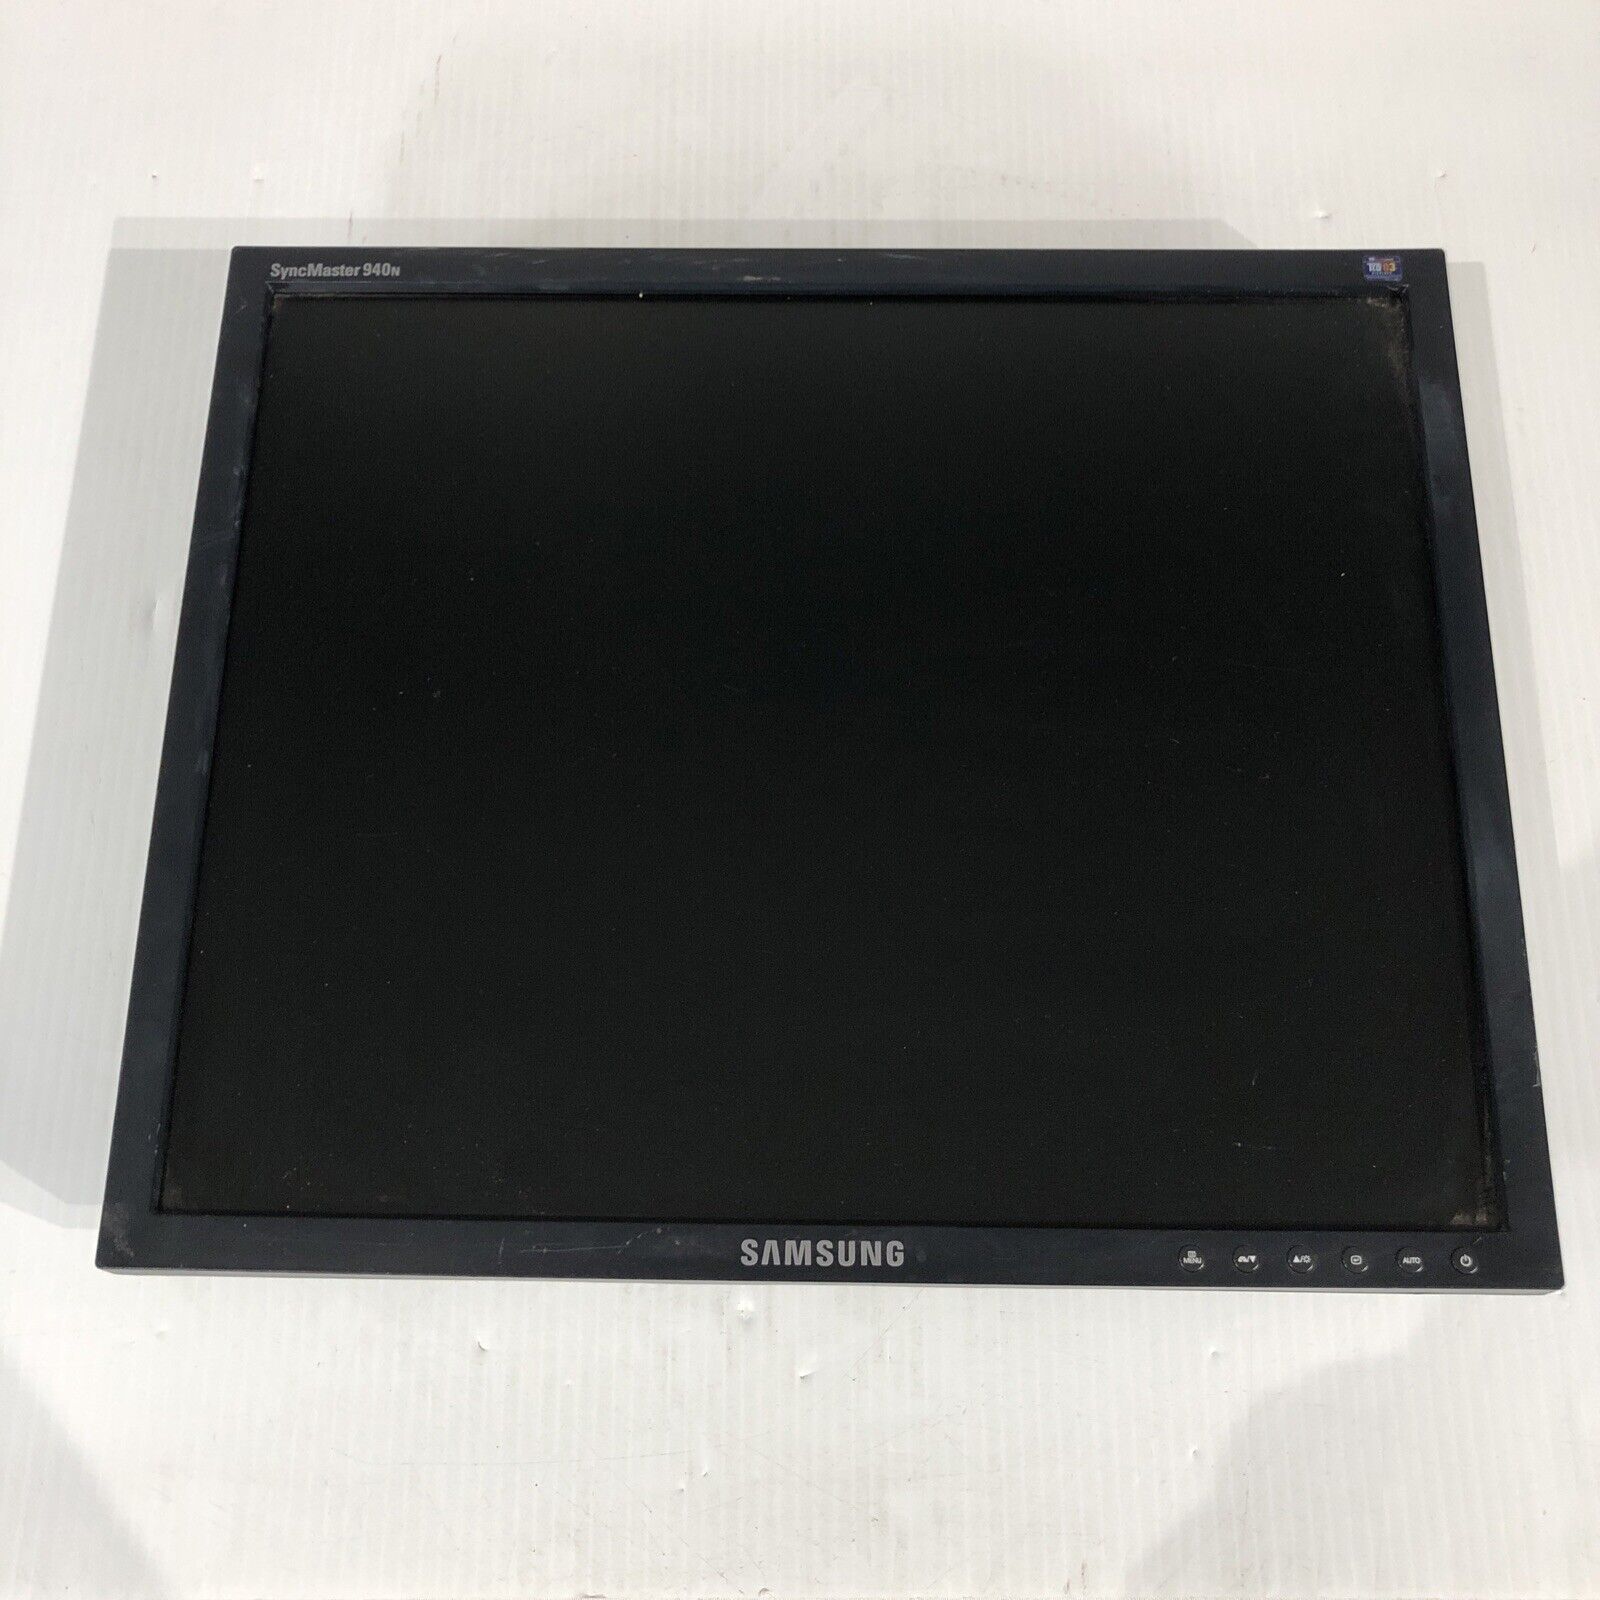 Samsung Monitor SyncMaster 940N  19in Monitor, No Stand